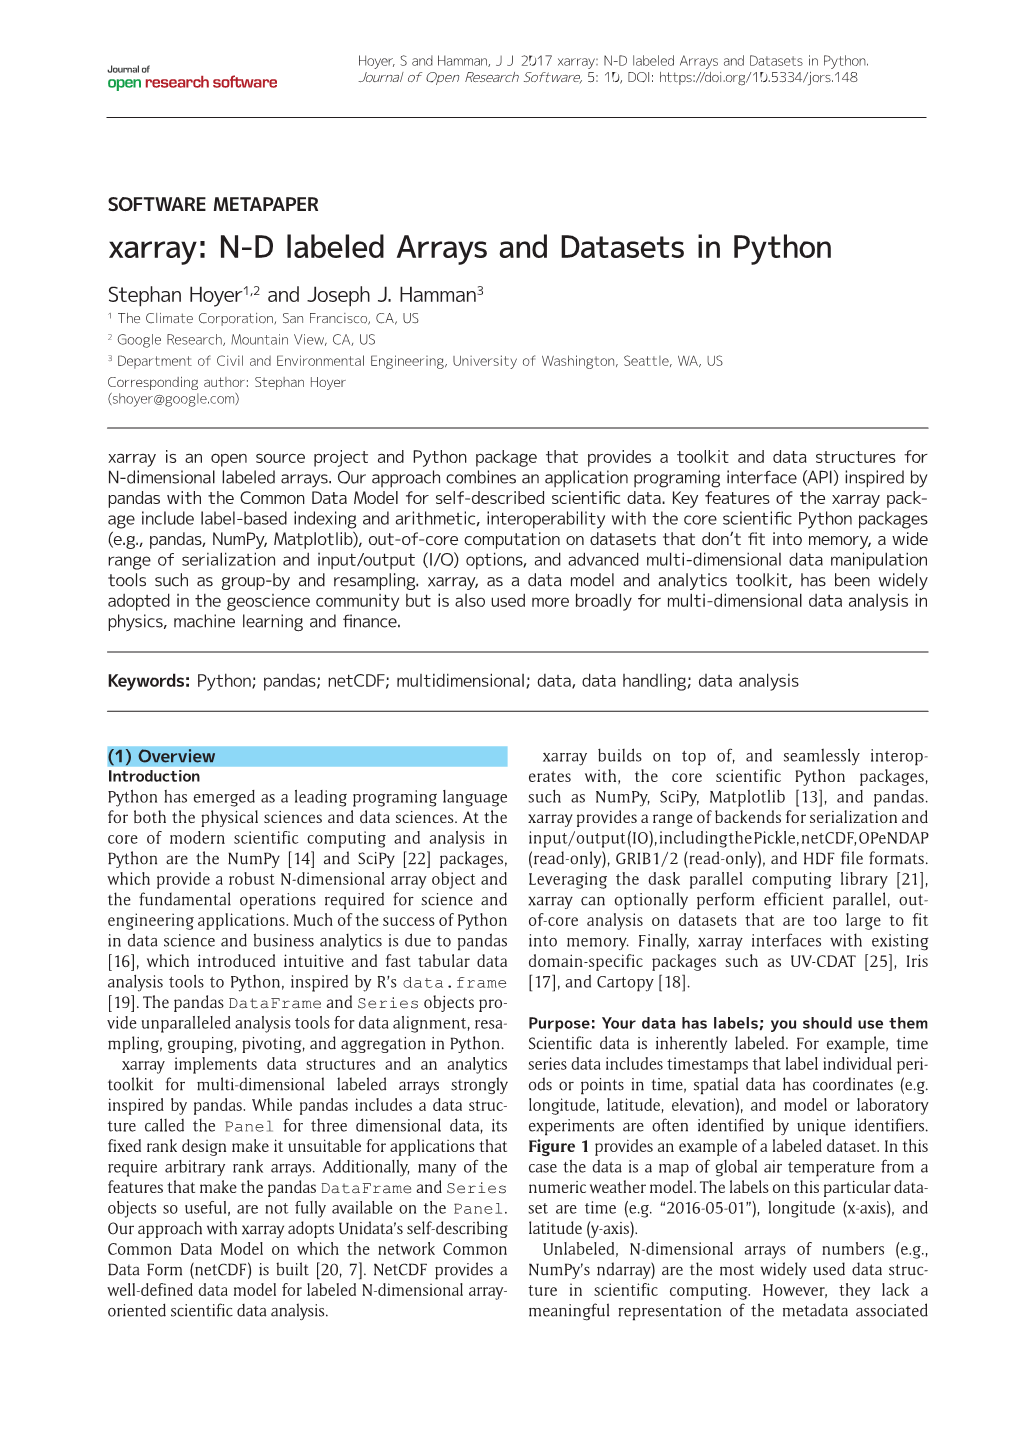 Xarray: N-D Labeled Arrays and Datasets in Python